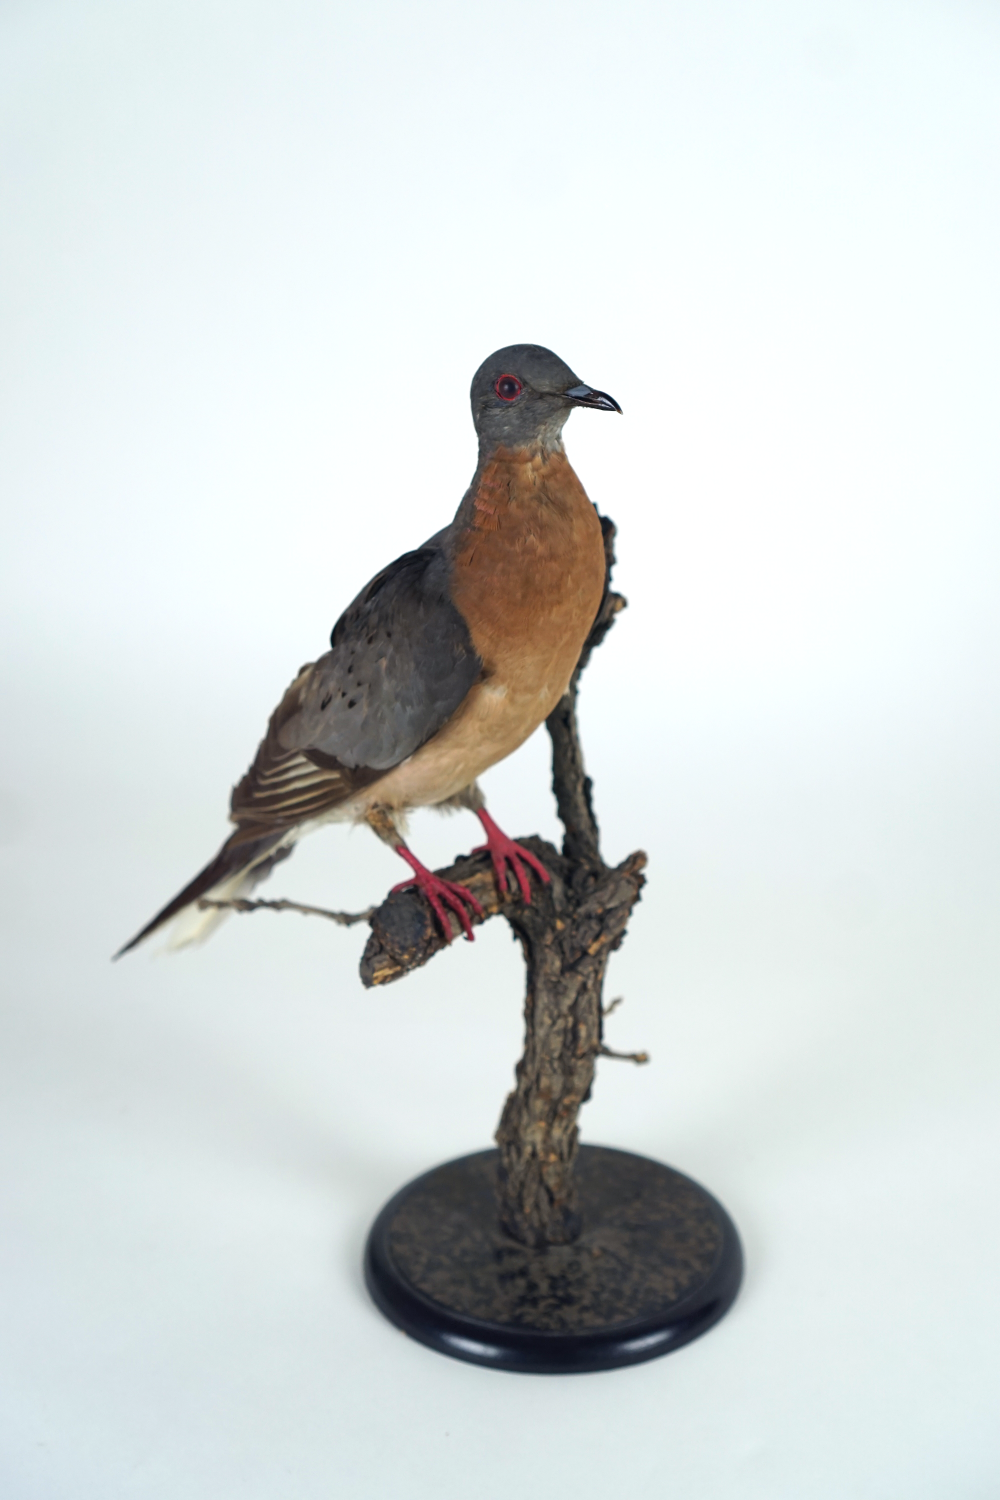 A taxidermy passenger pigeon on display.